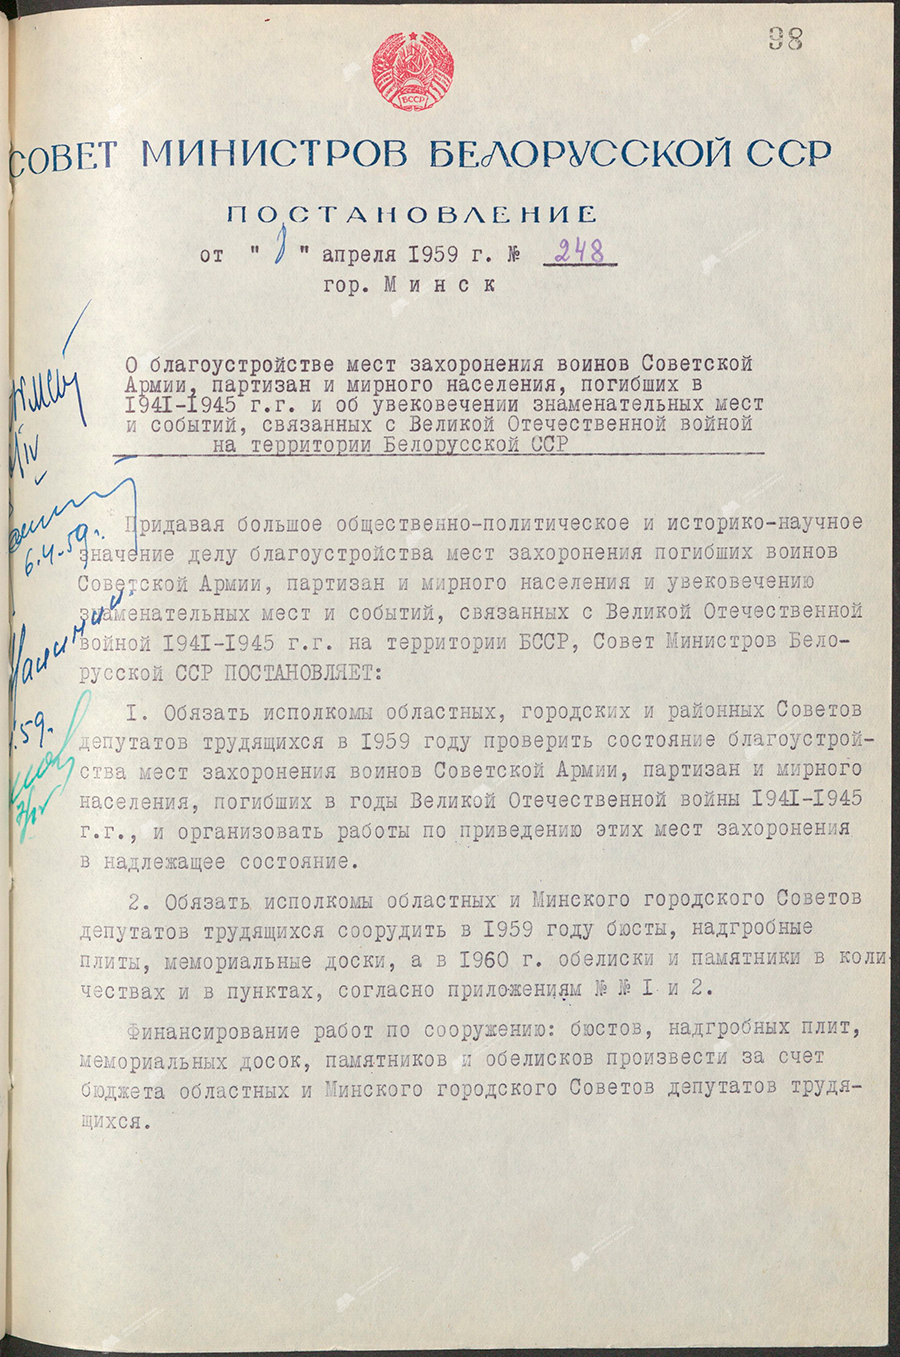 Resolution No. 248 of the Council of Ministers of the BSSR «On the improvement of burial places of soldiers of the Soviet Army, partisans and civilians who died in 1941 – 1945.» and on the perpetuation of significant places and events associated with the Great Patriotic War on the territory of the Belarusian SSR»-с. 0